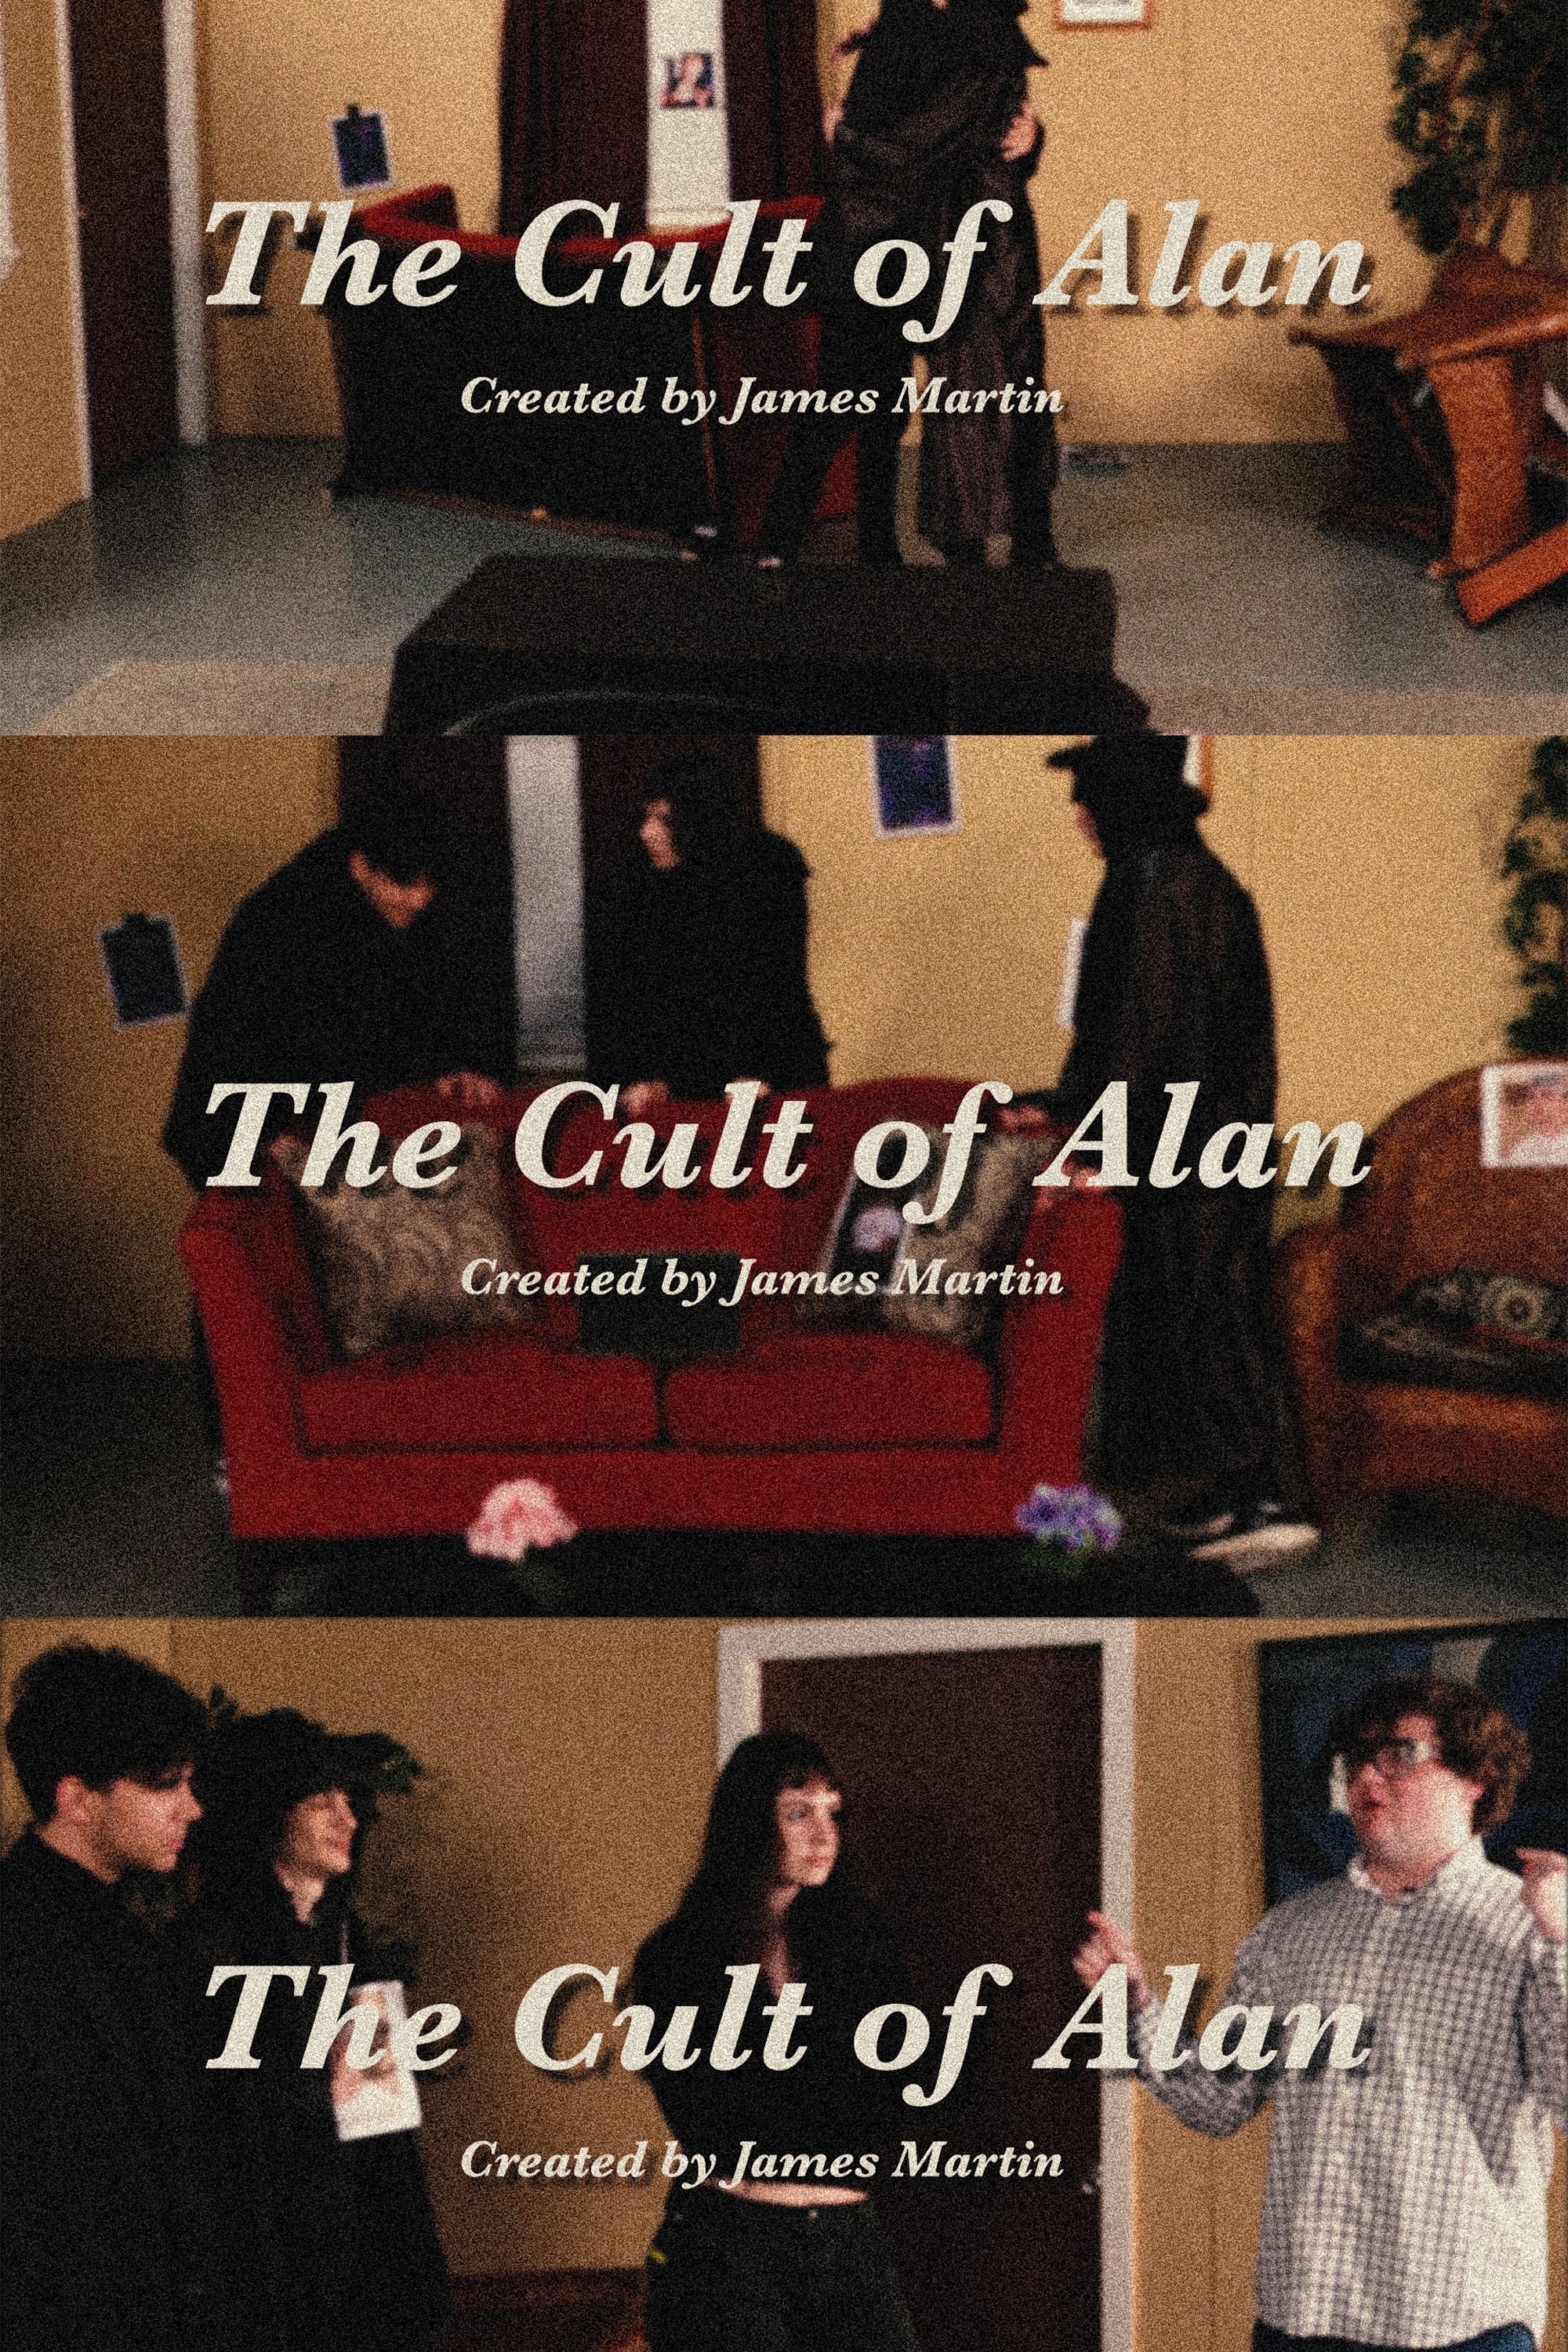 The Cult of Alan